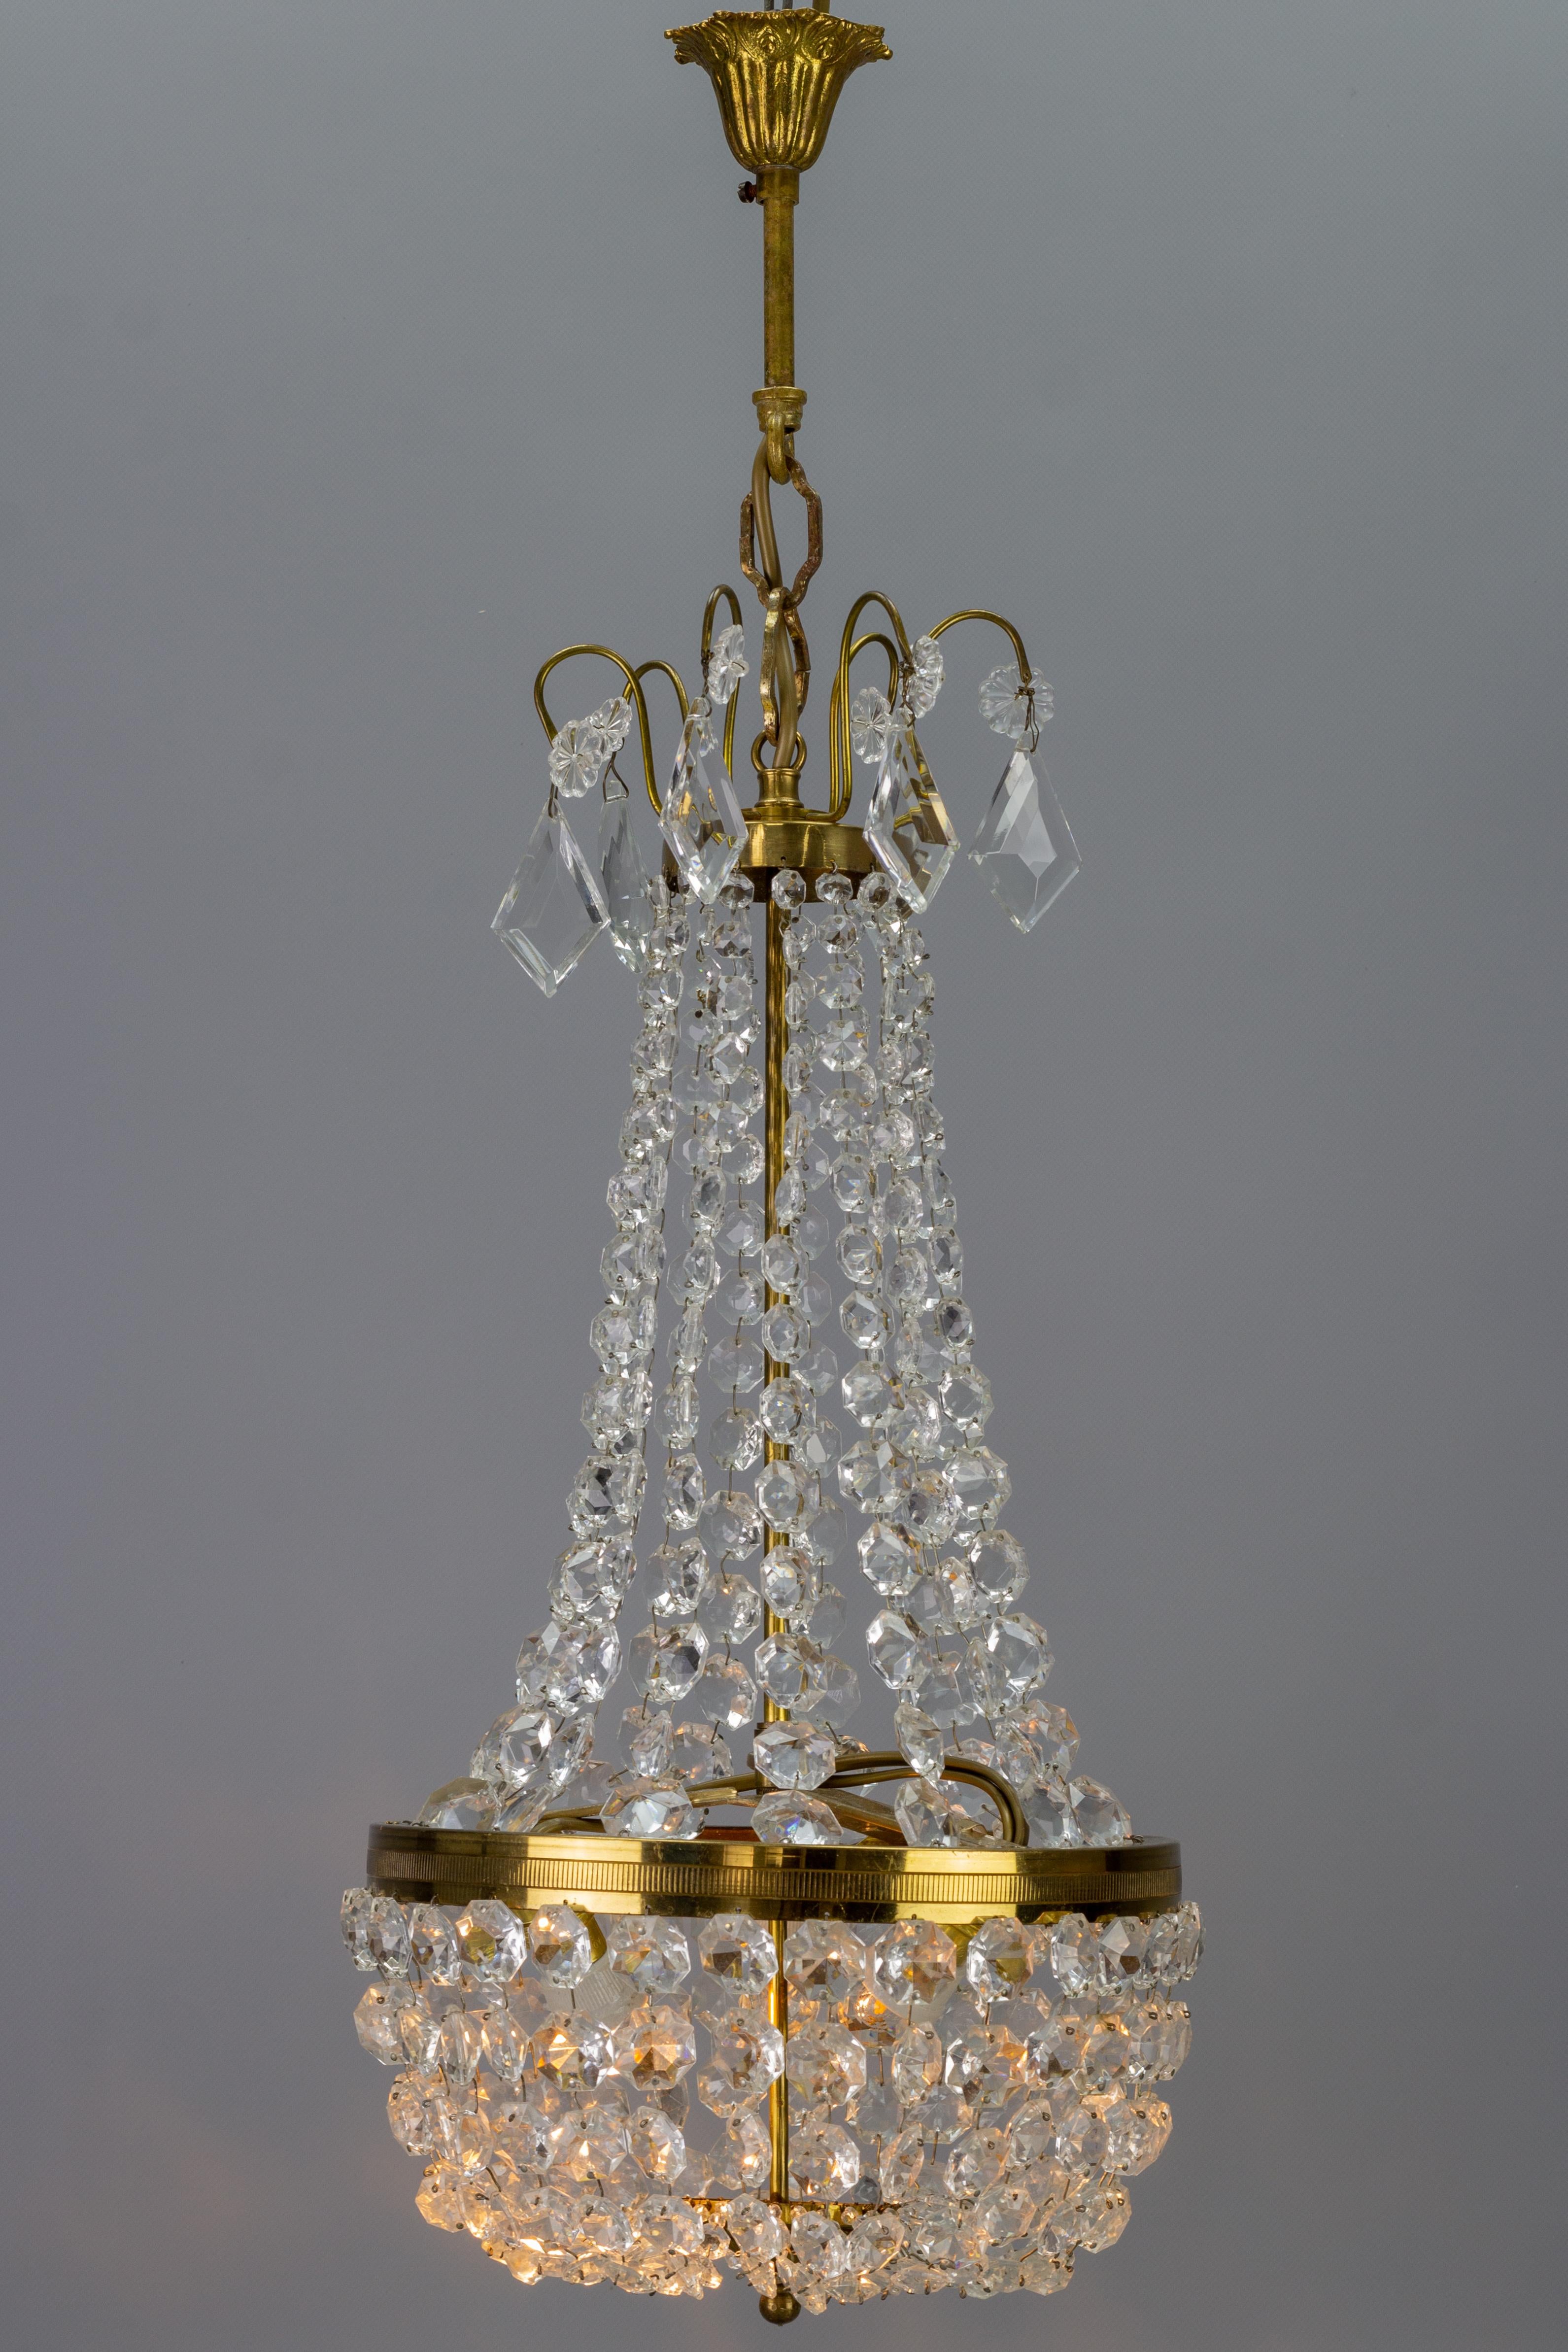 Mid-20th Century Empire Style Brass and Crystal Glass Three-Light Basket Chandelier For Sale